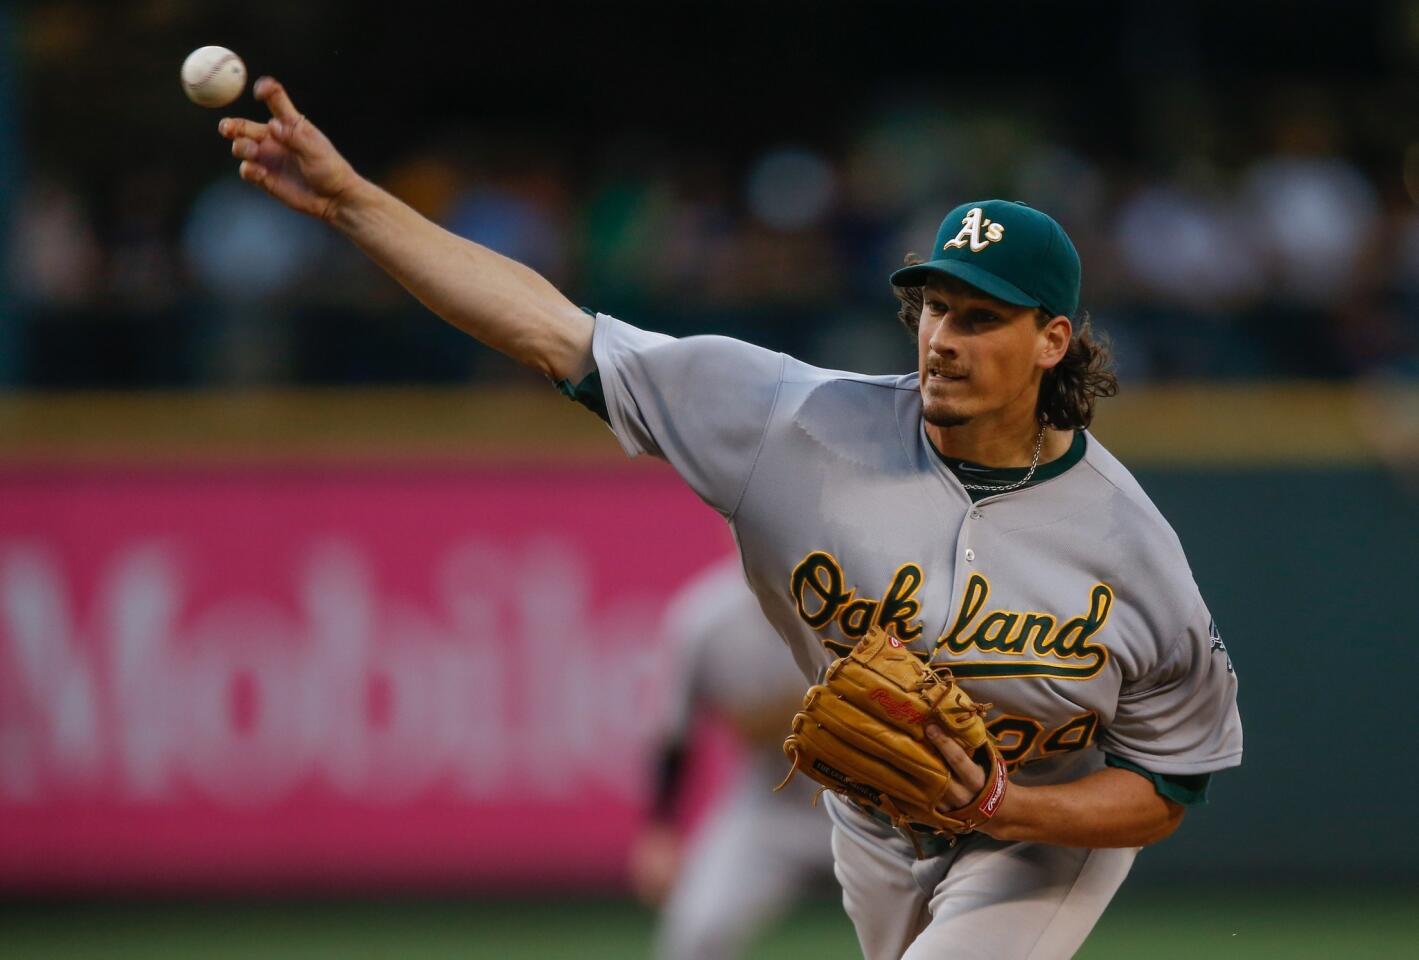 Recently traded Chicago Cubs starting pitcher Jeff Samardzija sold his three-bedroom, 2,500-square-foot condominium unit in the Southport Corridor area of west Lakeview for $600,000.